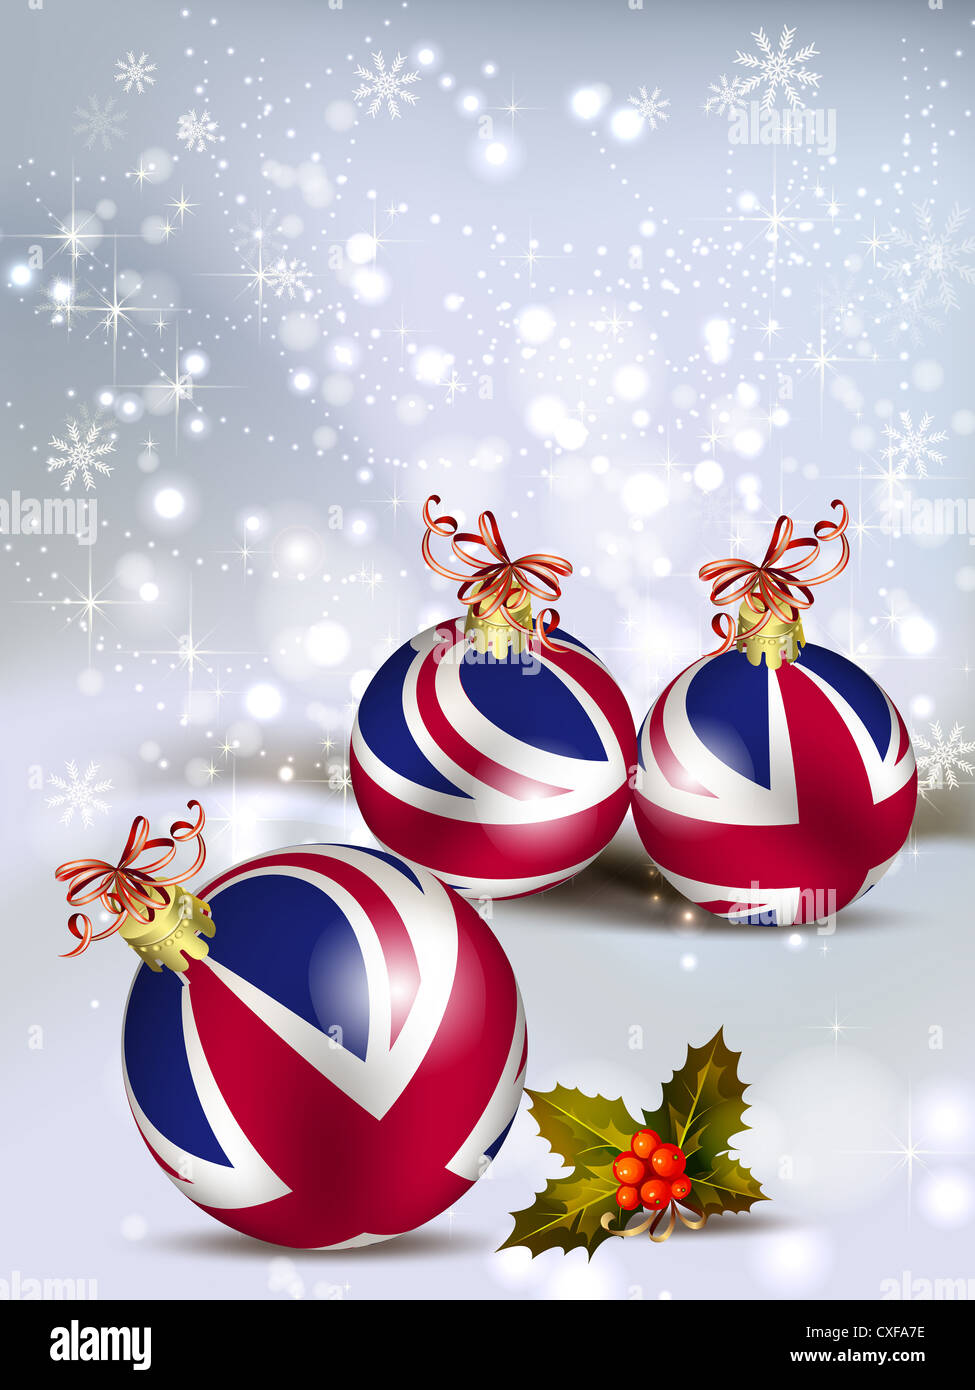 Christmas card decoration from United Kingdom baubles Stock Photo